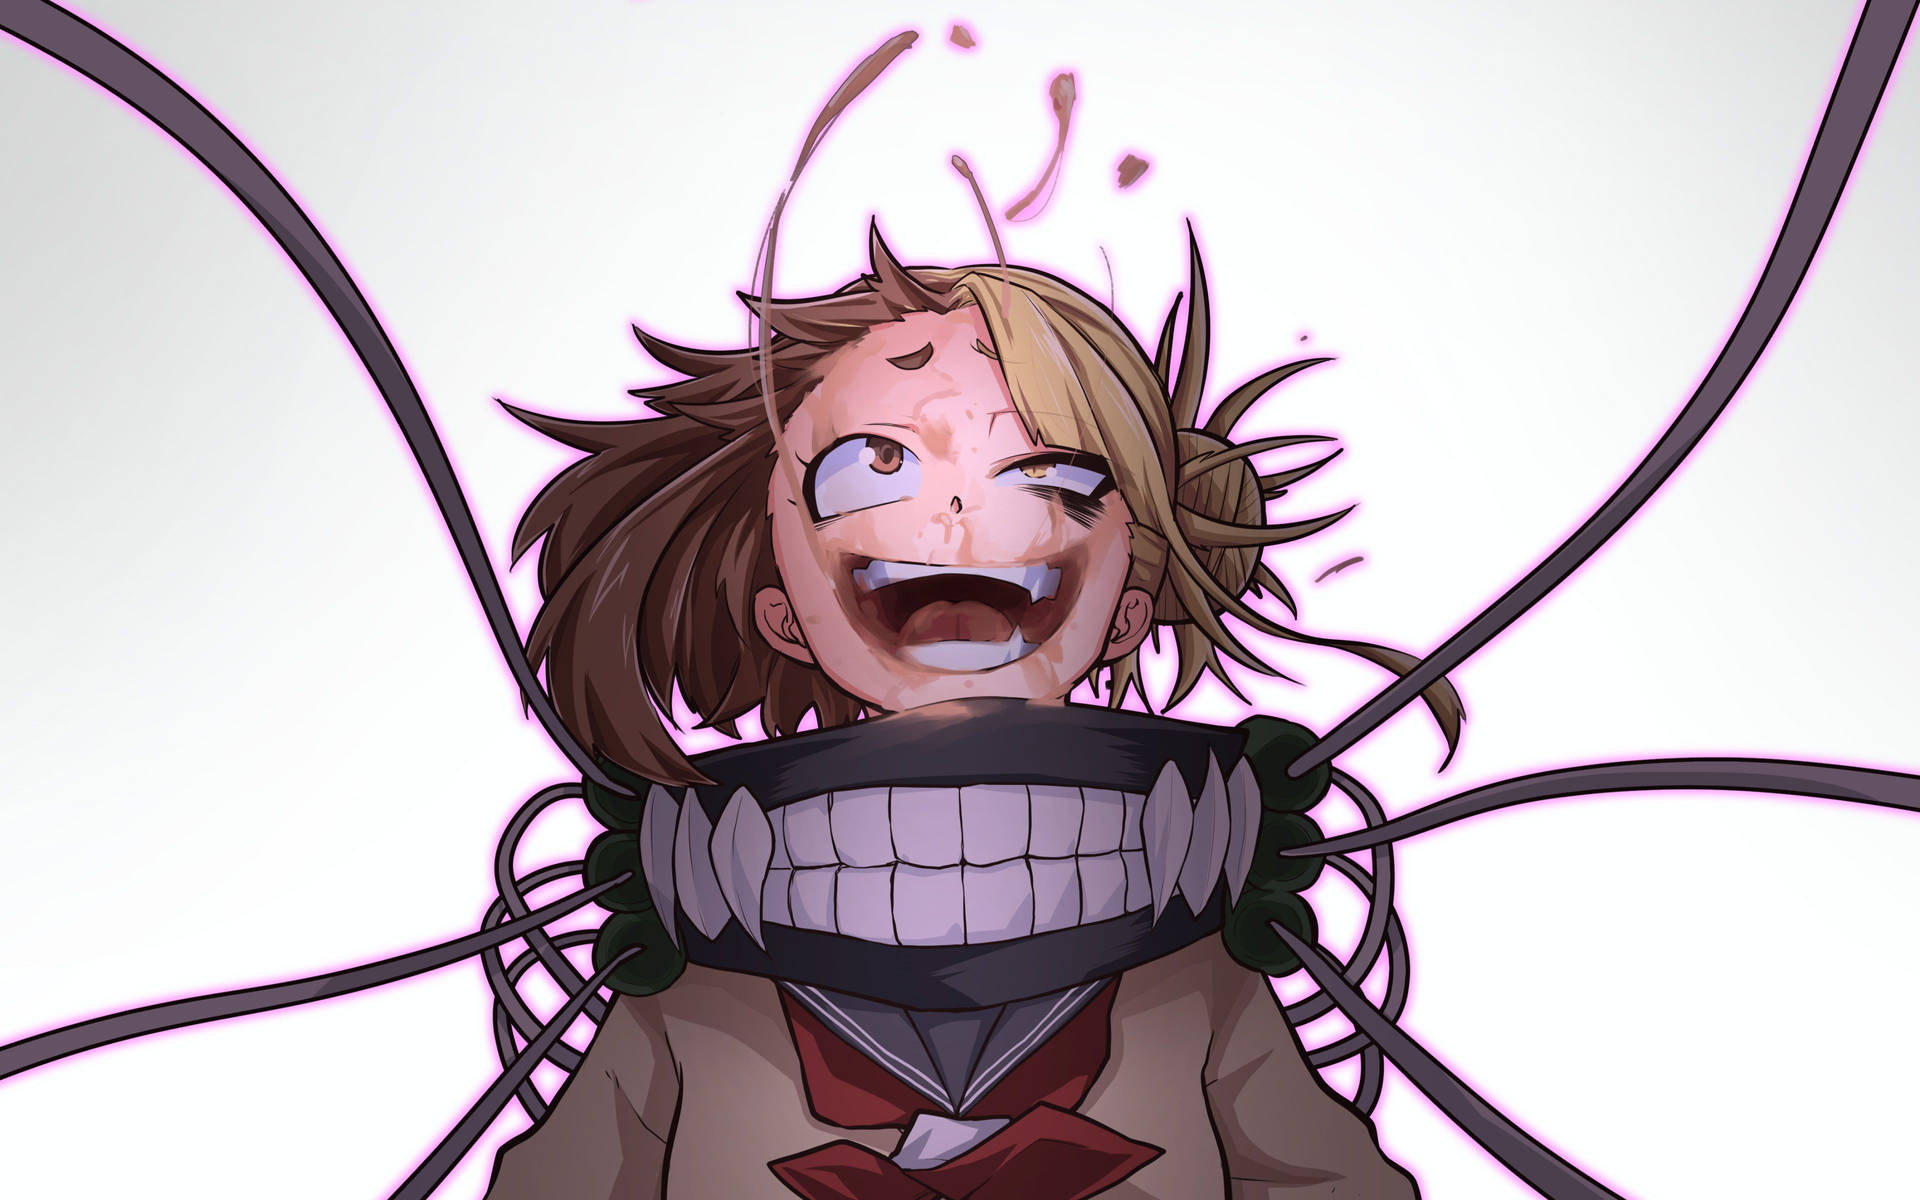 Top 999+ Himiko Toga Wallpaper Full HD, 4K✅Free to Use